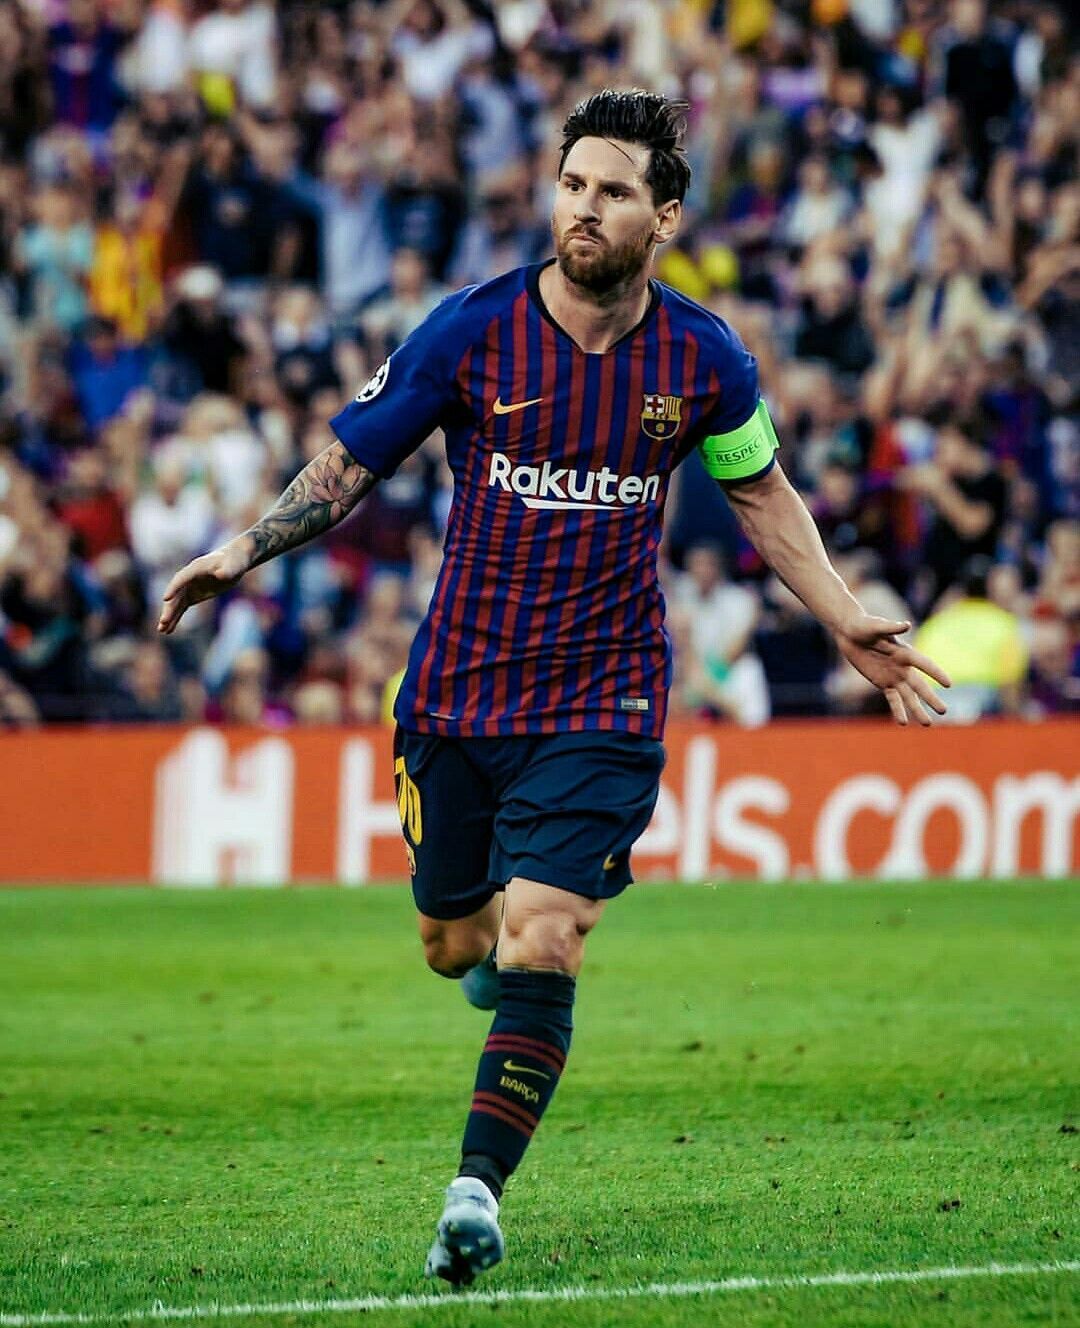 Free Download LeoMessi Gets The First Goal For UEFA 201819 And Then Two More [1080x1328] For Your Desktop, Mobile & Tablet. Explore Messi 2018 19 Wallpaper. Messi 2018 19 Wallpaper, Messi Background, Messi Wallpaper